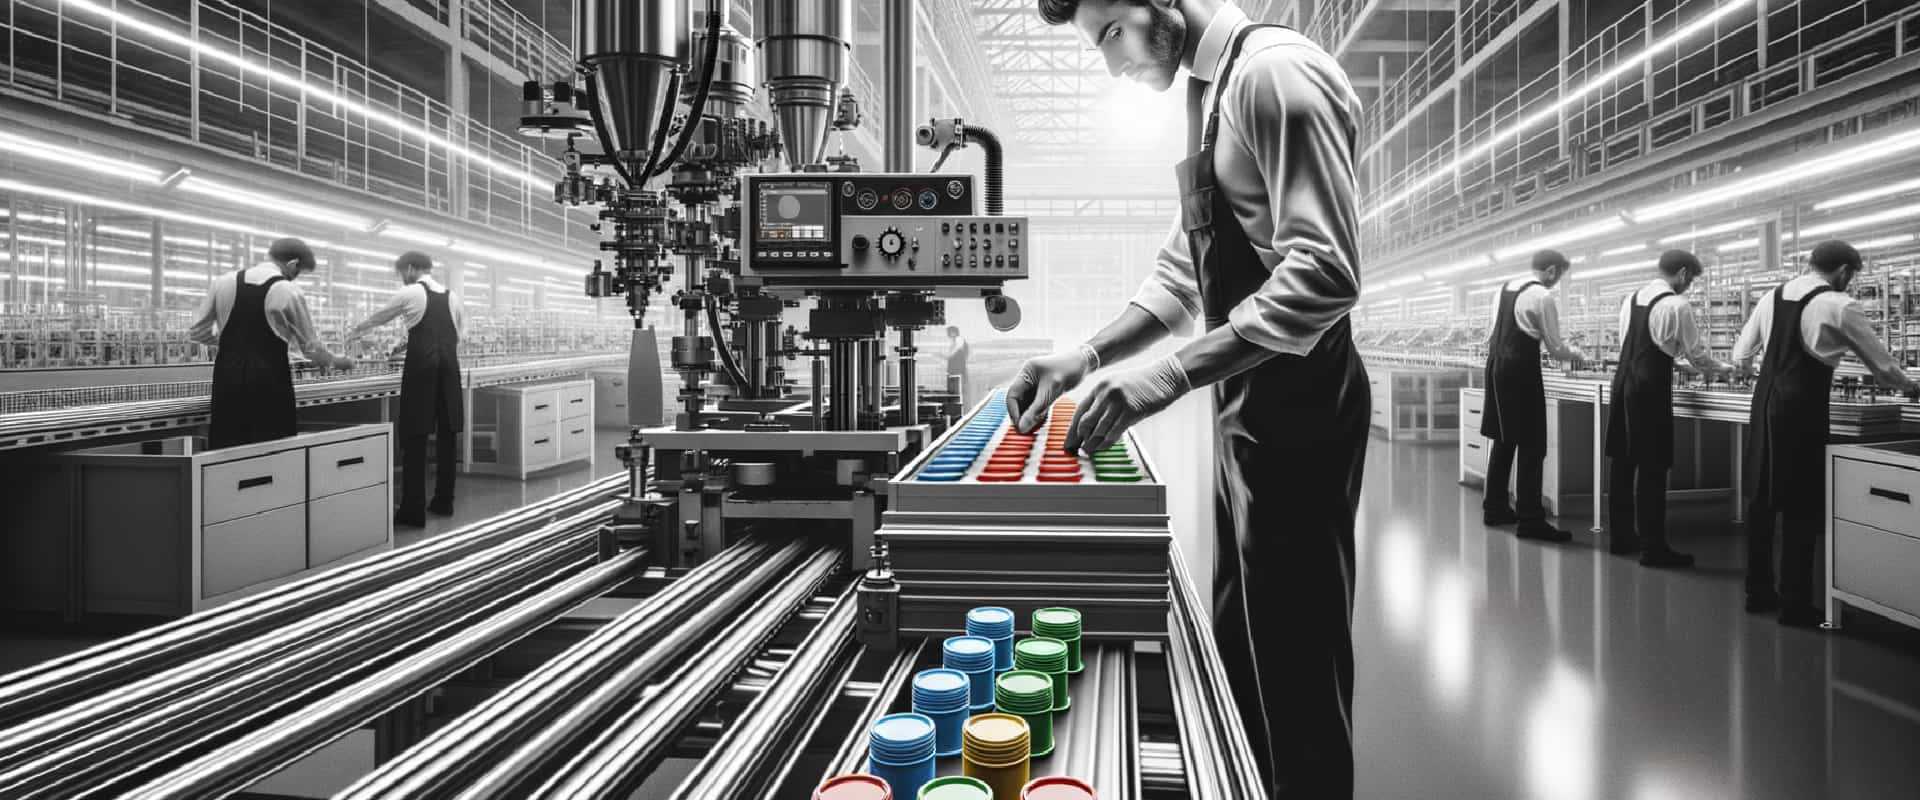 Just-In-Time Lean Manufacturing